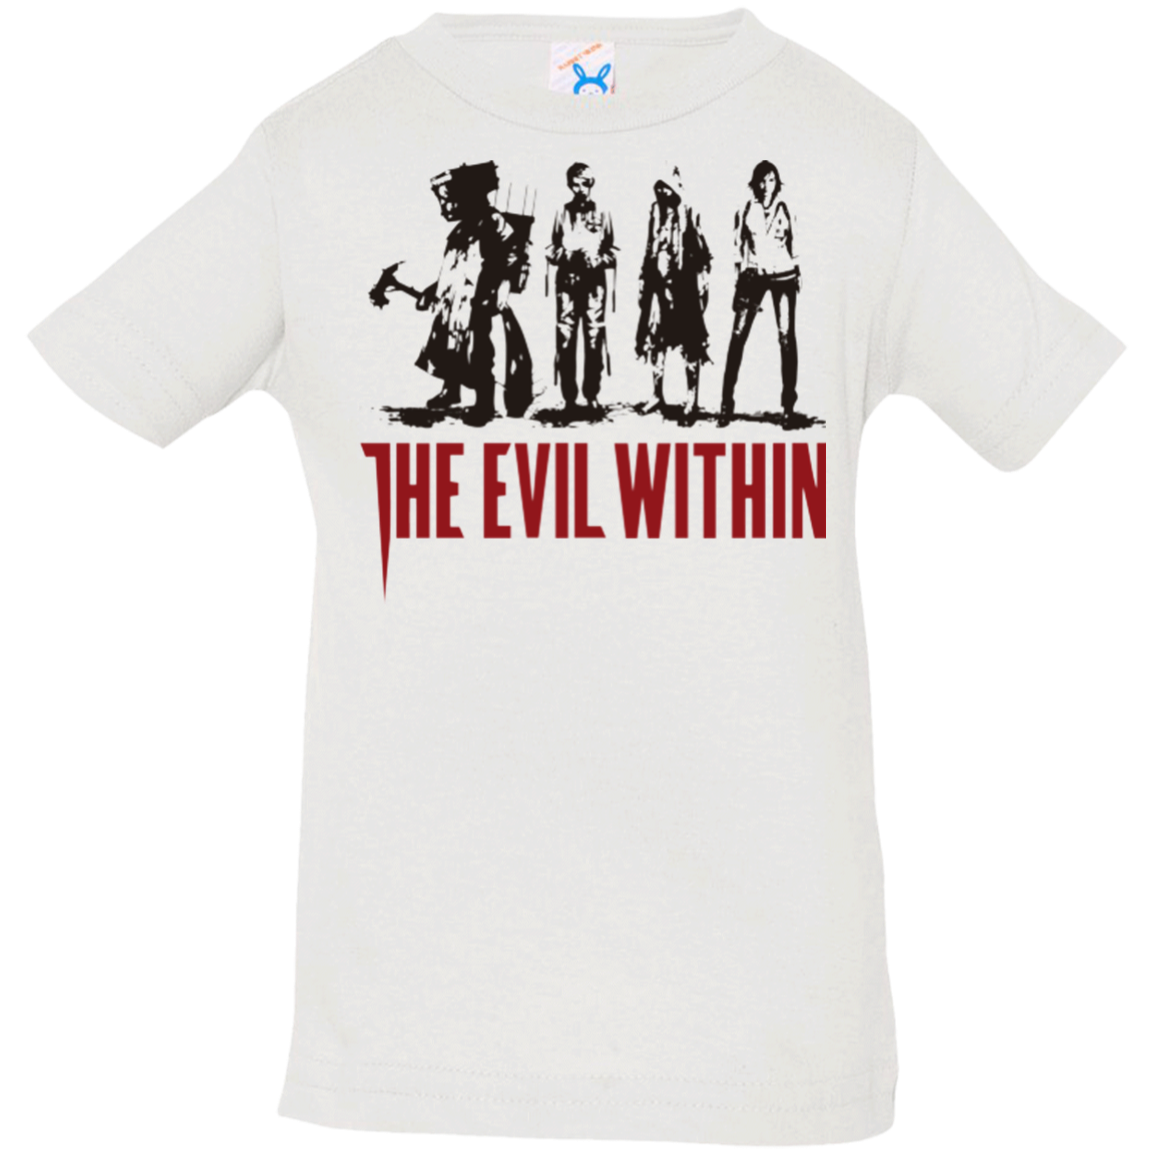 The Evil Within Infant Premium T-Shirt